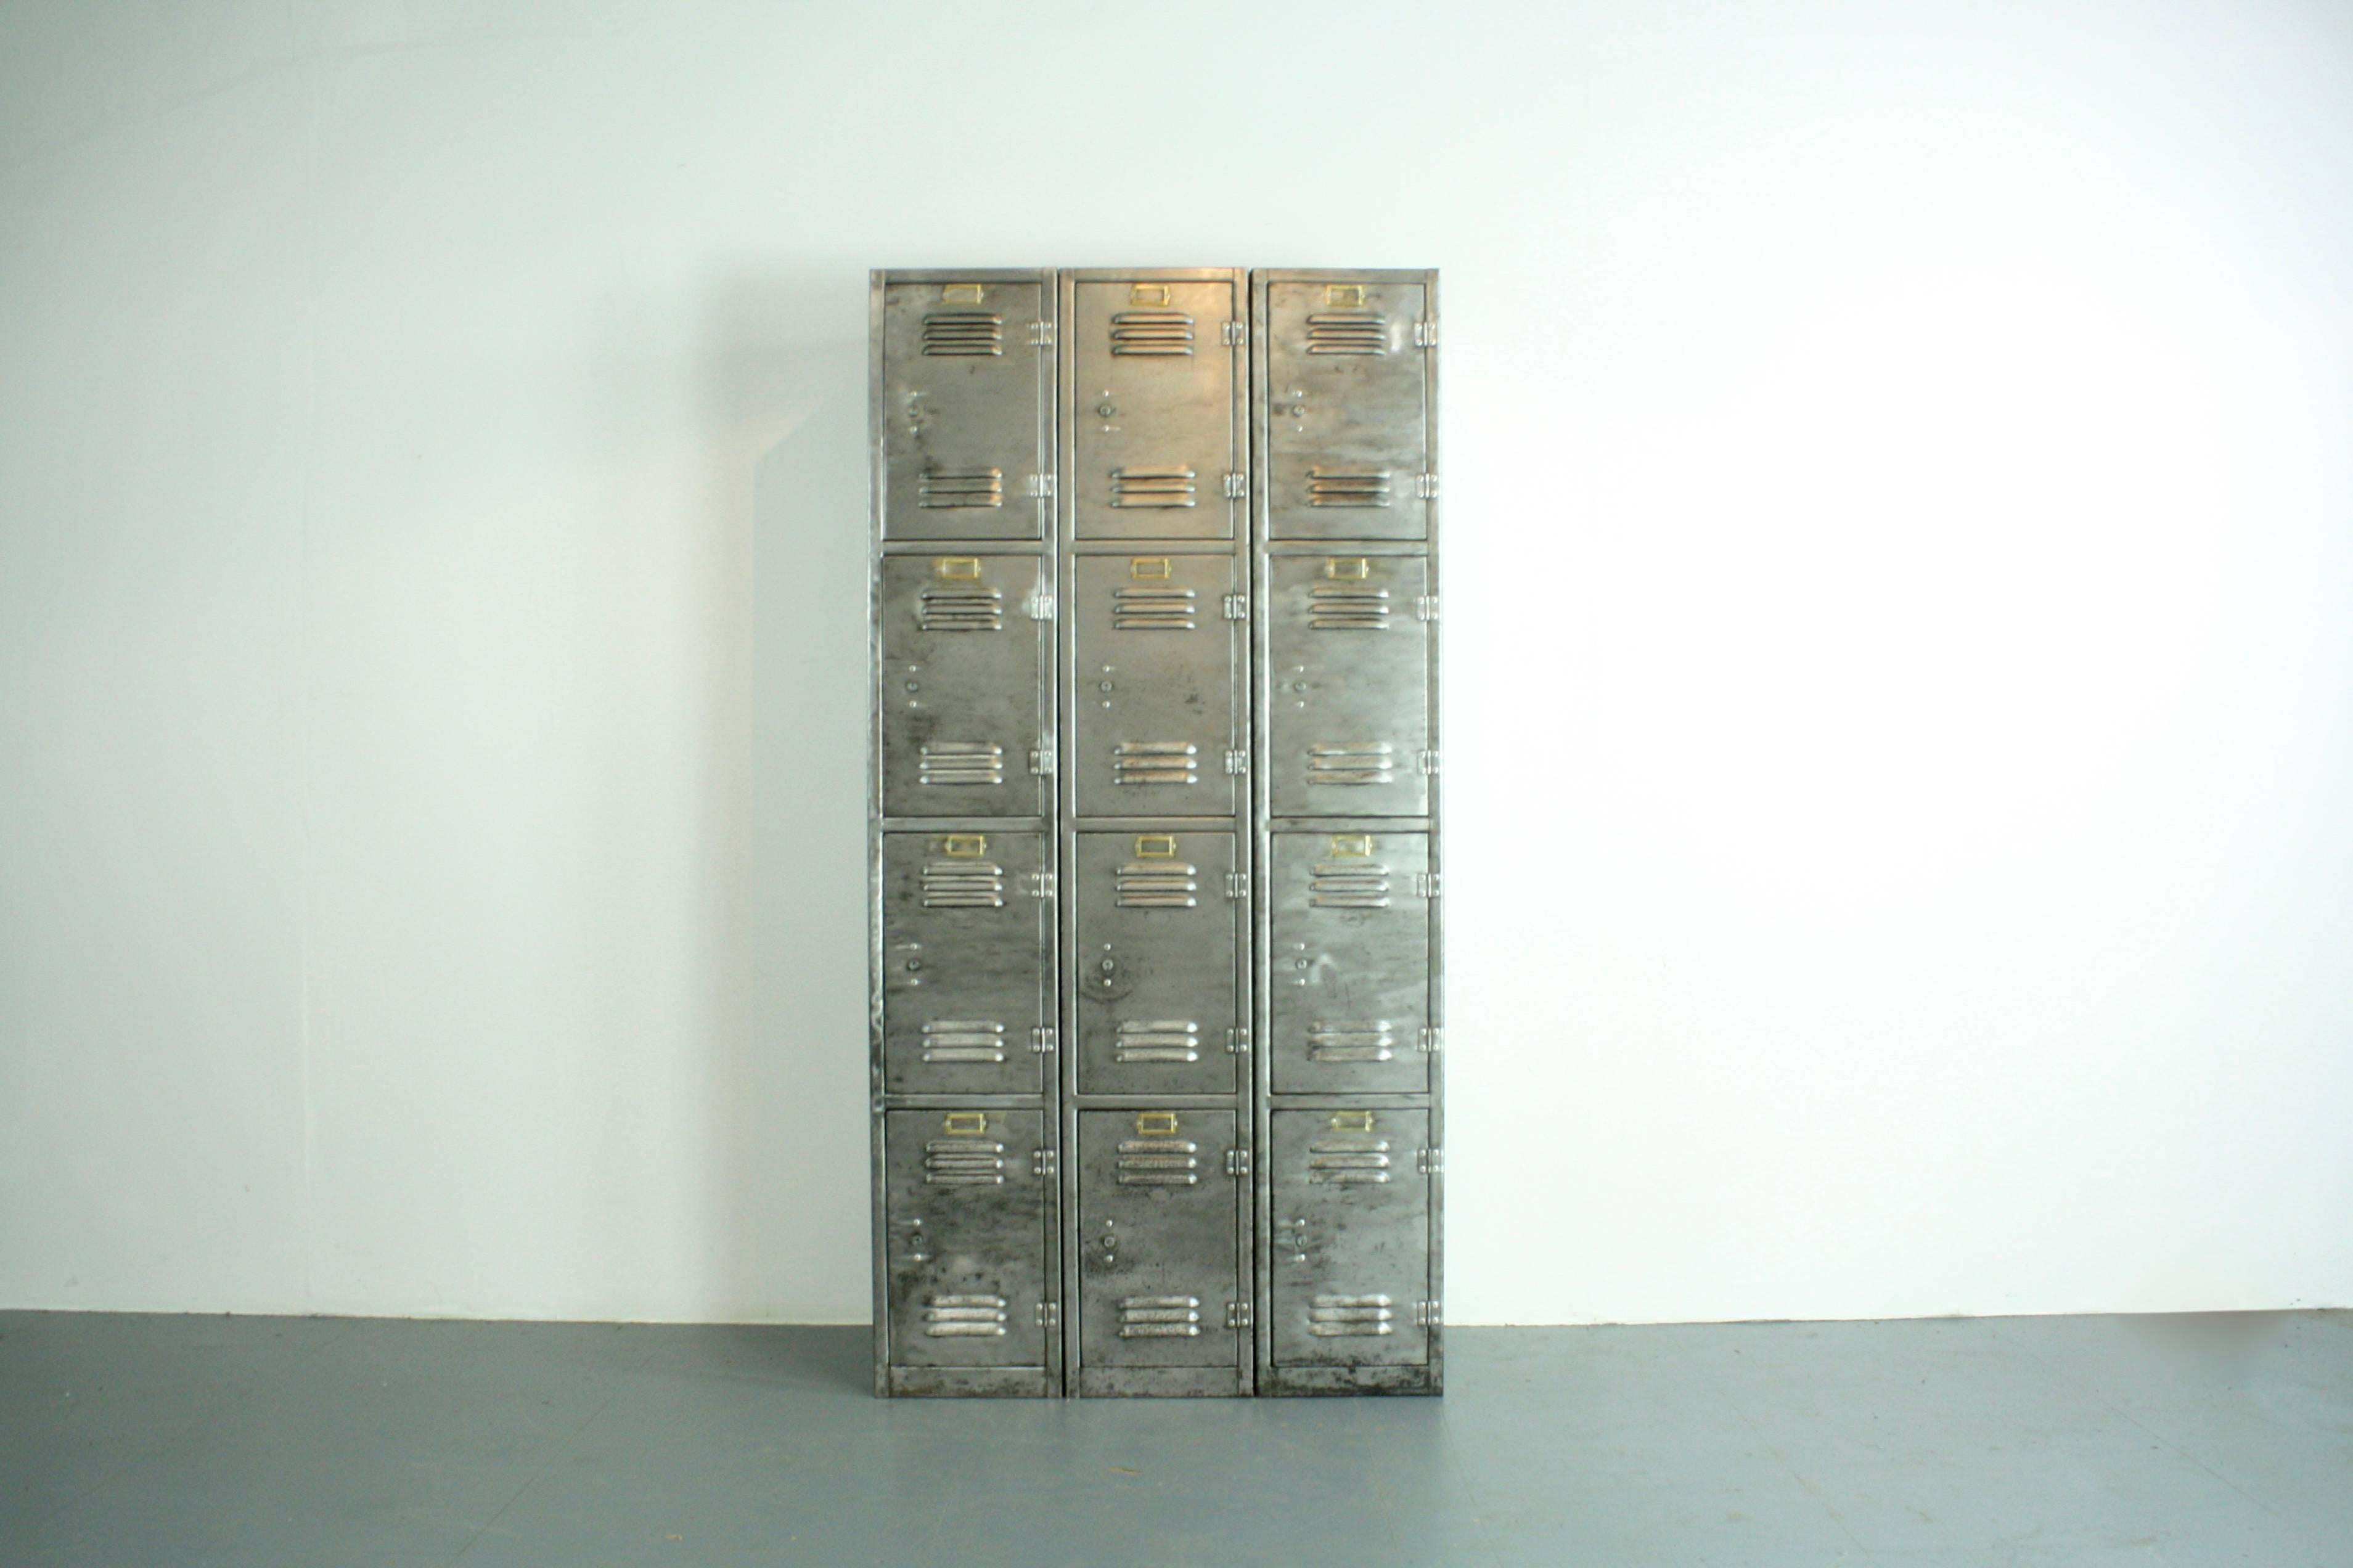 Vintage stripped and polished steel school locker with 12 compartments.

The insides retain the original painted finish. They have working locks but no keys currently, although they could be cut if wanted.

Please note that, due to its age and